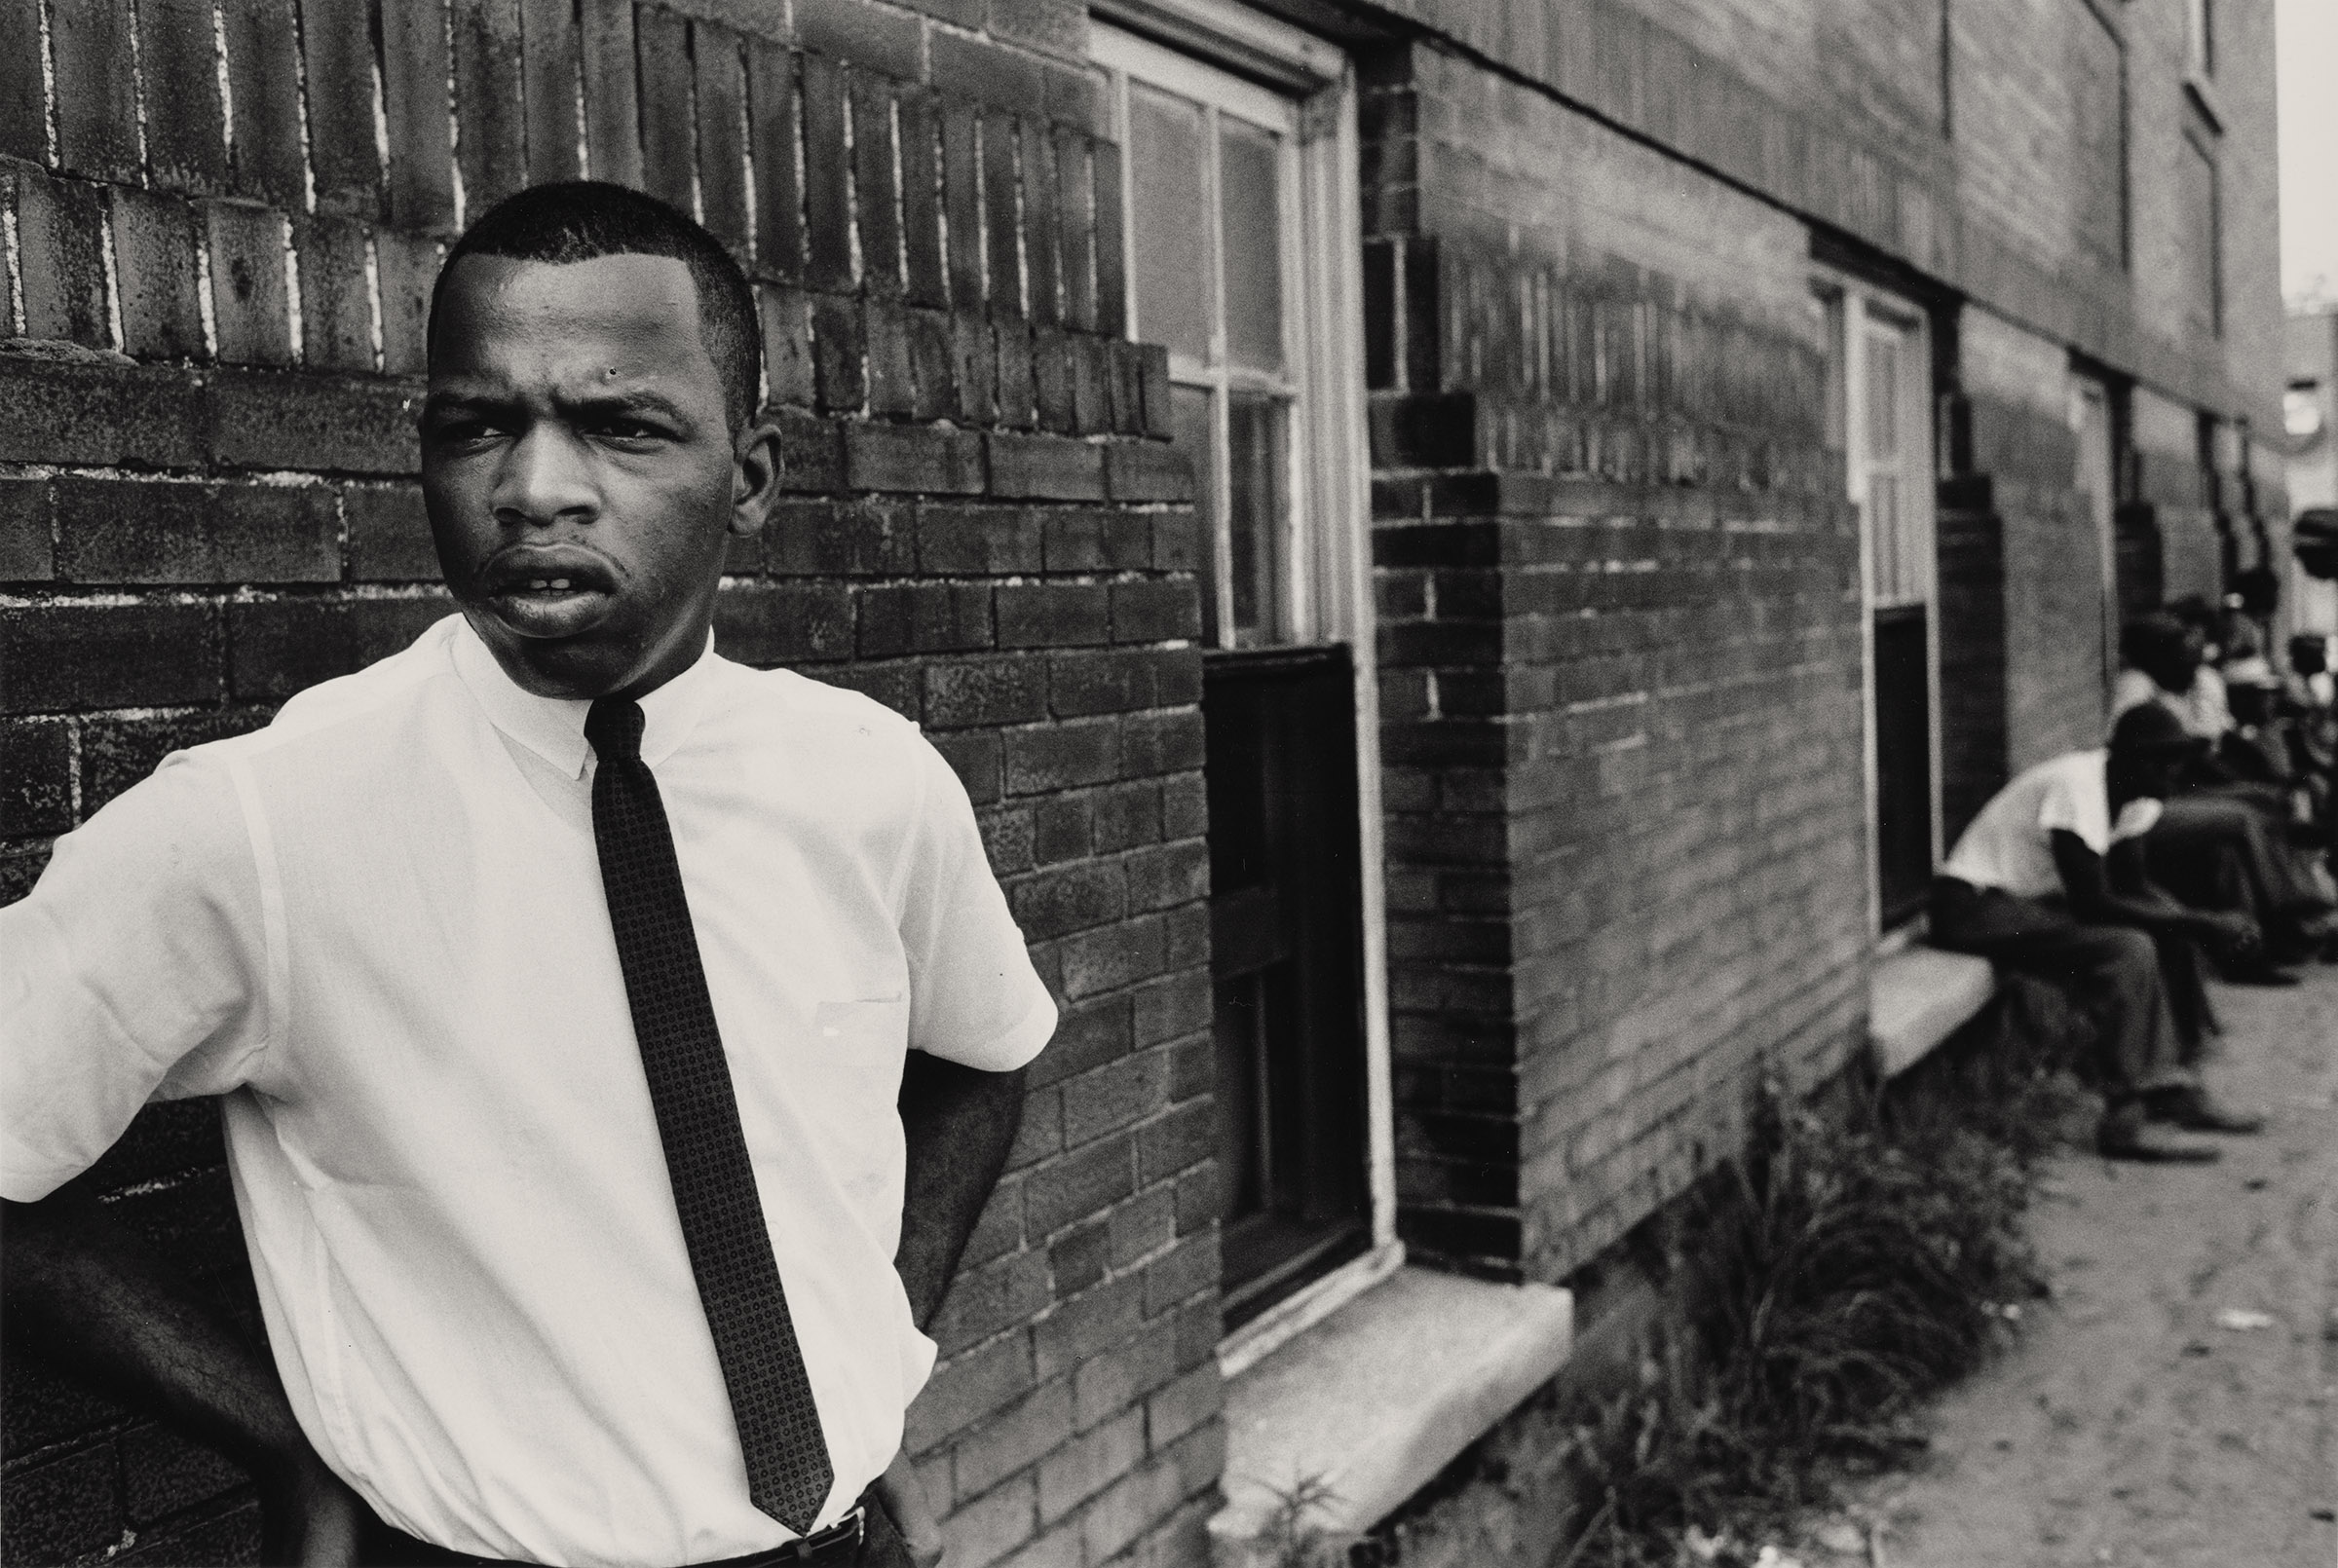 John Lewis, 1963. Photograph by Steve Schapiro. Portrait of John Lewis standing outside of a brick building in Clarksdale, Mississippi. Photograph in the collection of Miami University Art Museum, Oxford Ohio. Partial gift of the artist and partial purchase with contributions from the Kezur Endowment Fund (2019.23.12).